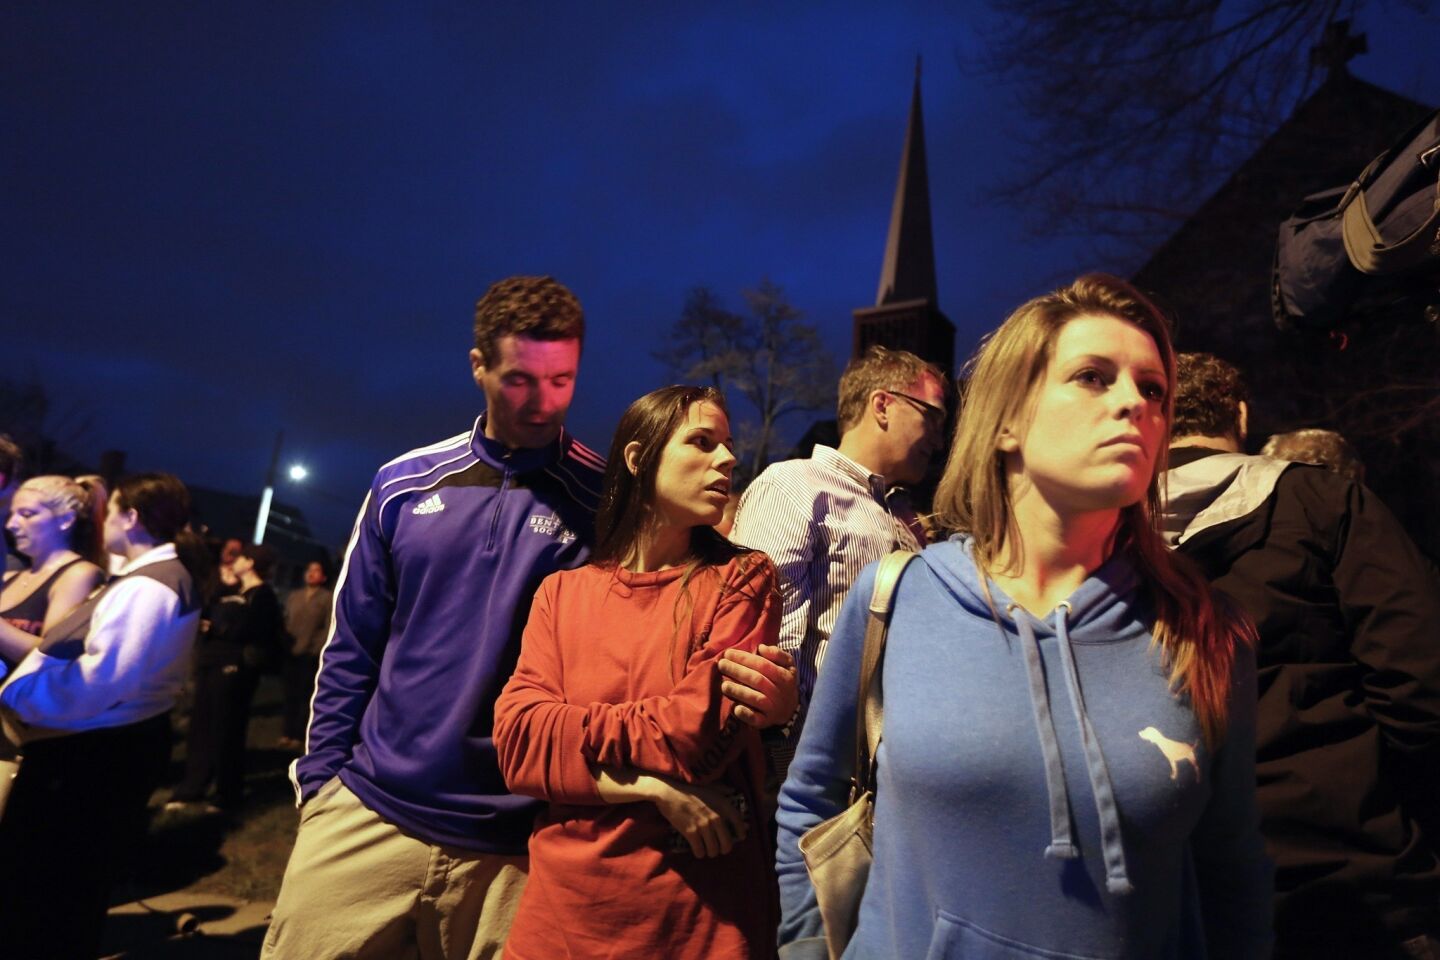 People watch as police arrive in Watertown, Mass., where shots were reportedly fired and Boston Marathon bombing suspect Dzhokhar Tsarnaev, 19, was reportedly taken into police custody.